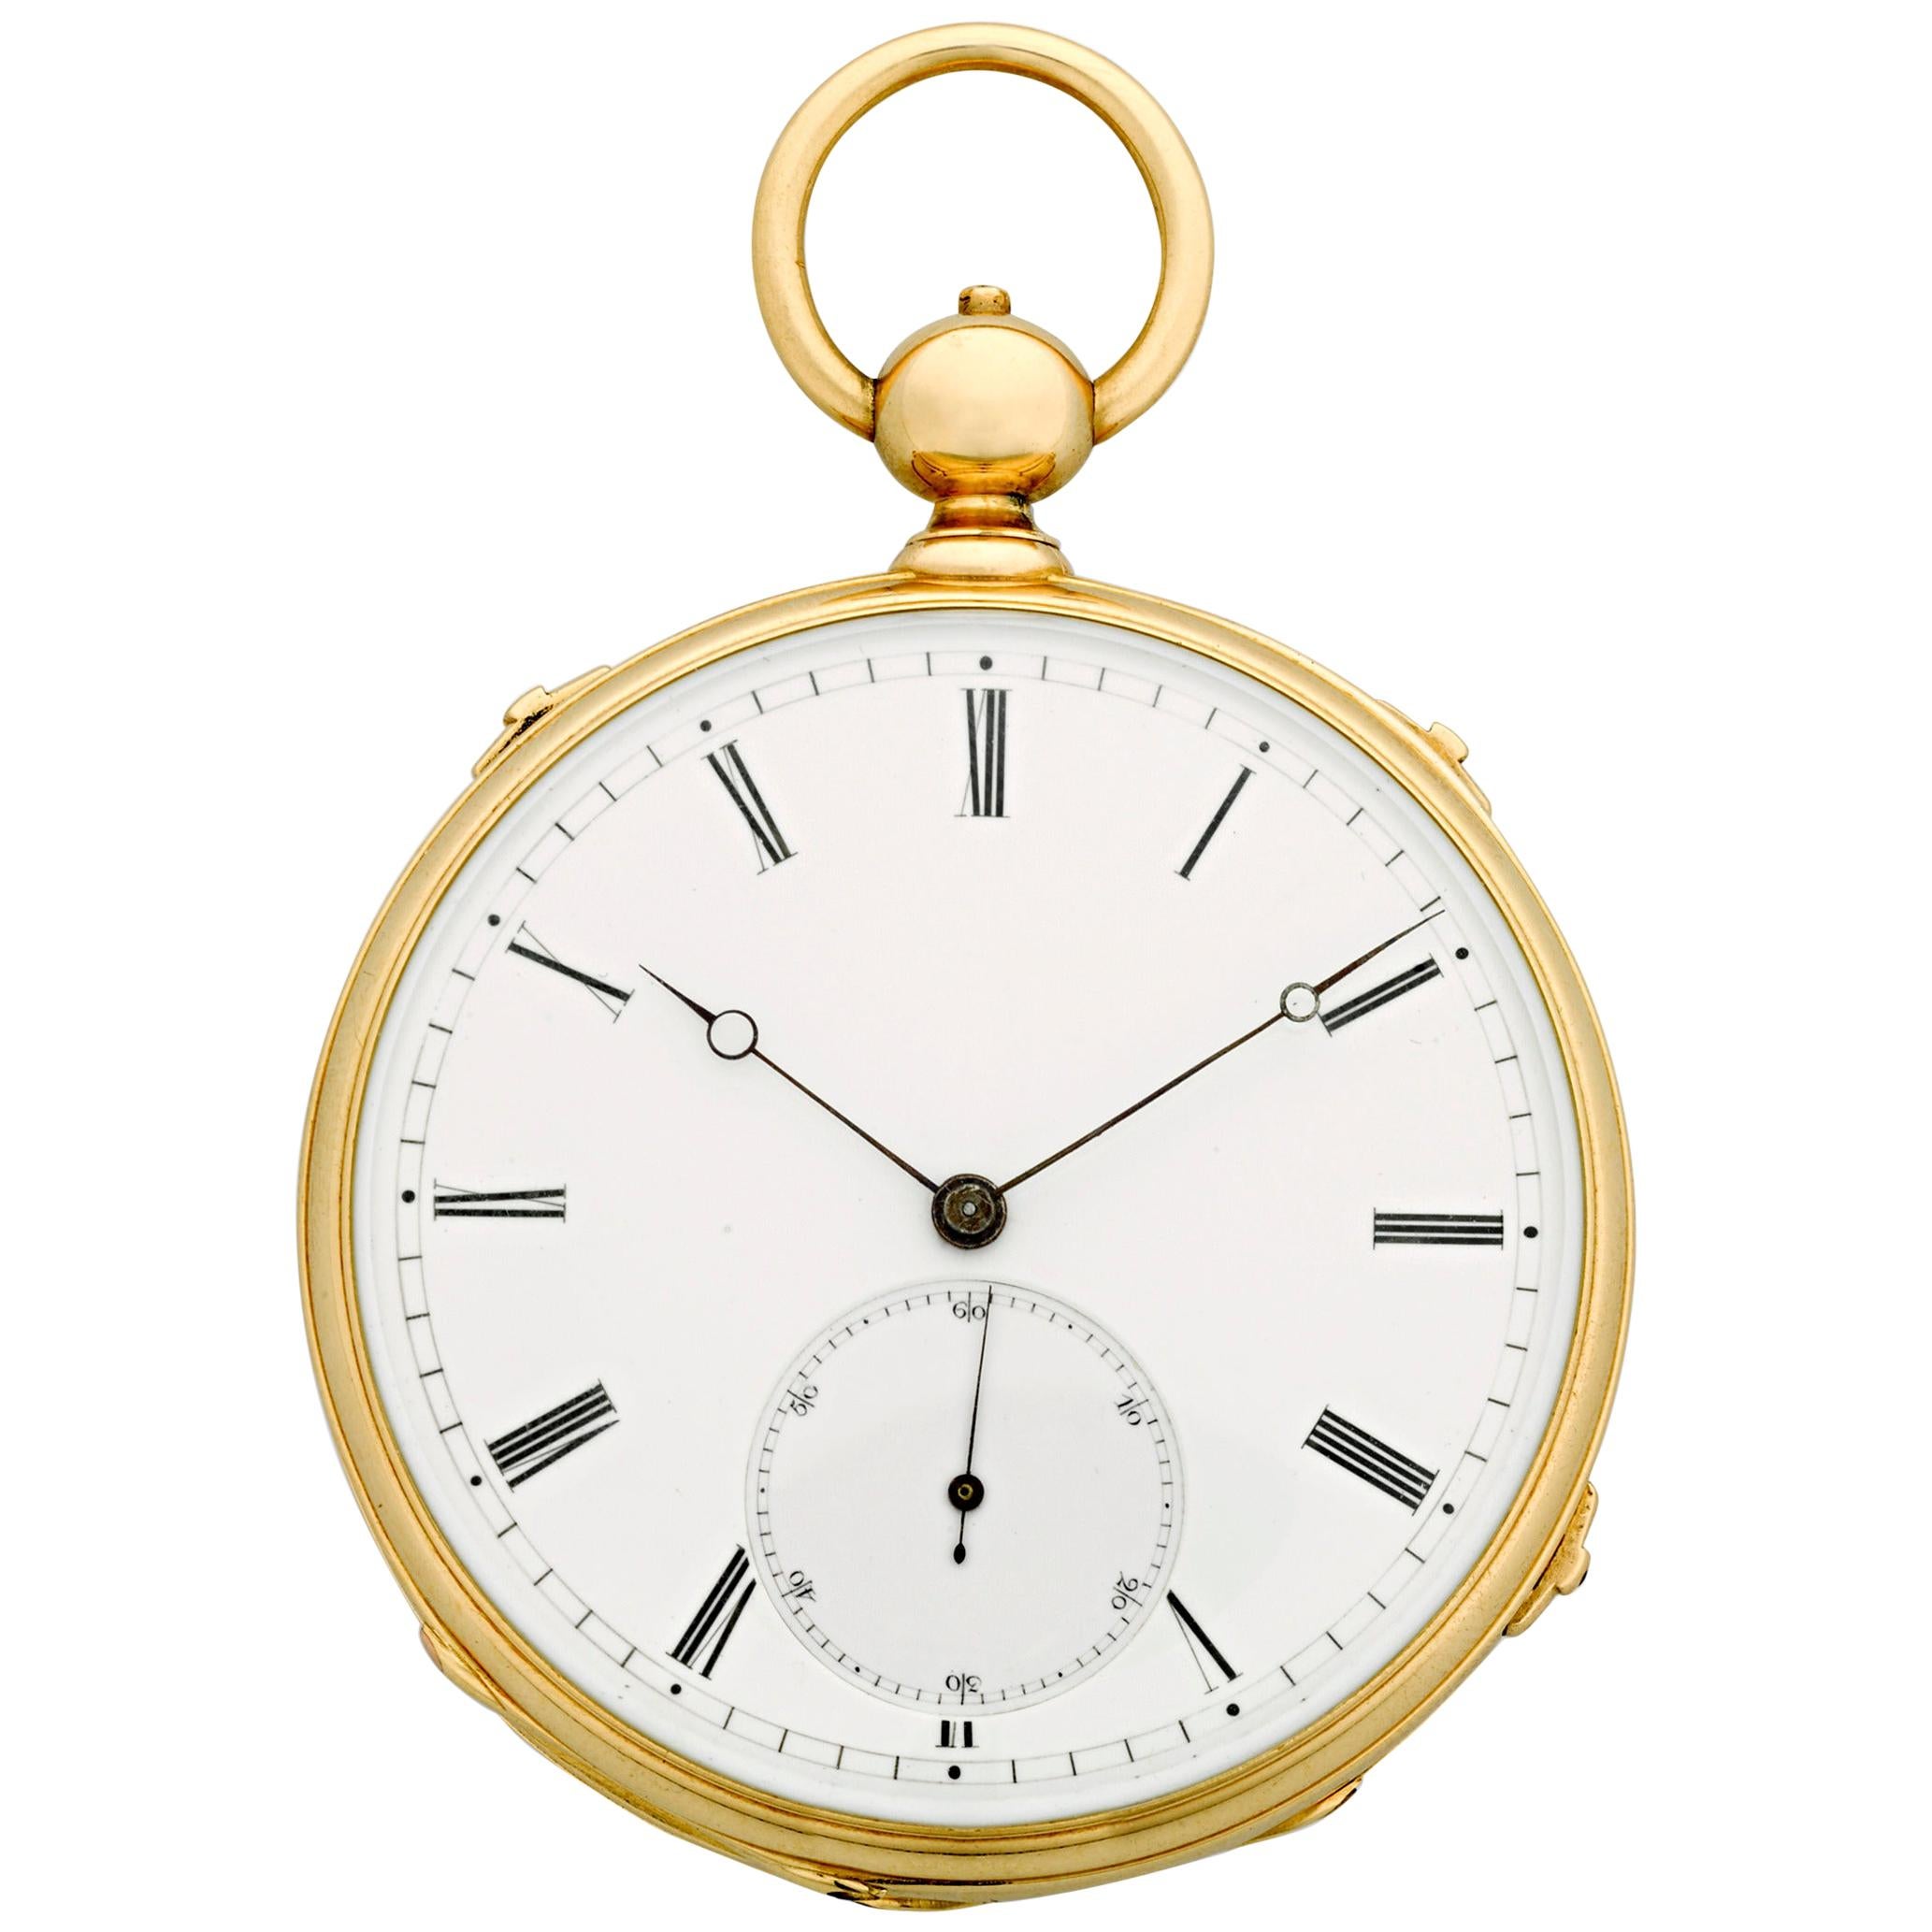 How old are key-wind pocket watches?